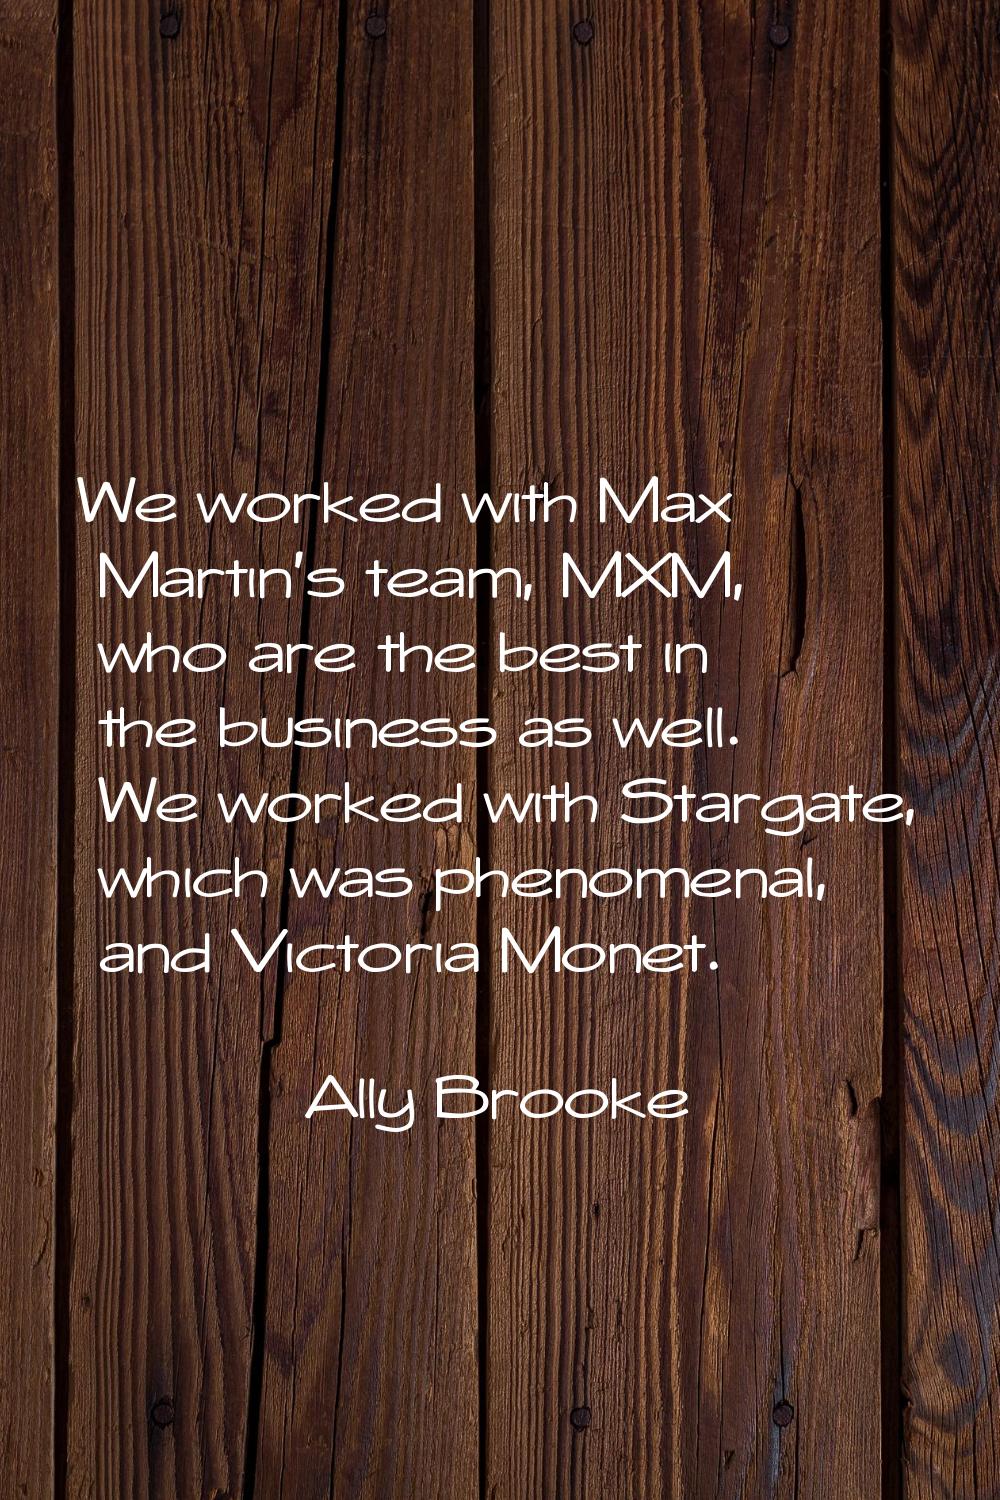 We worked with Max Martin's team, MXM, who are the best in the business as well. We worked with Sta